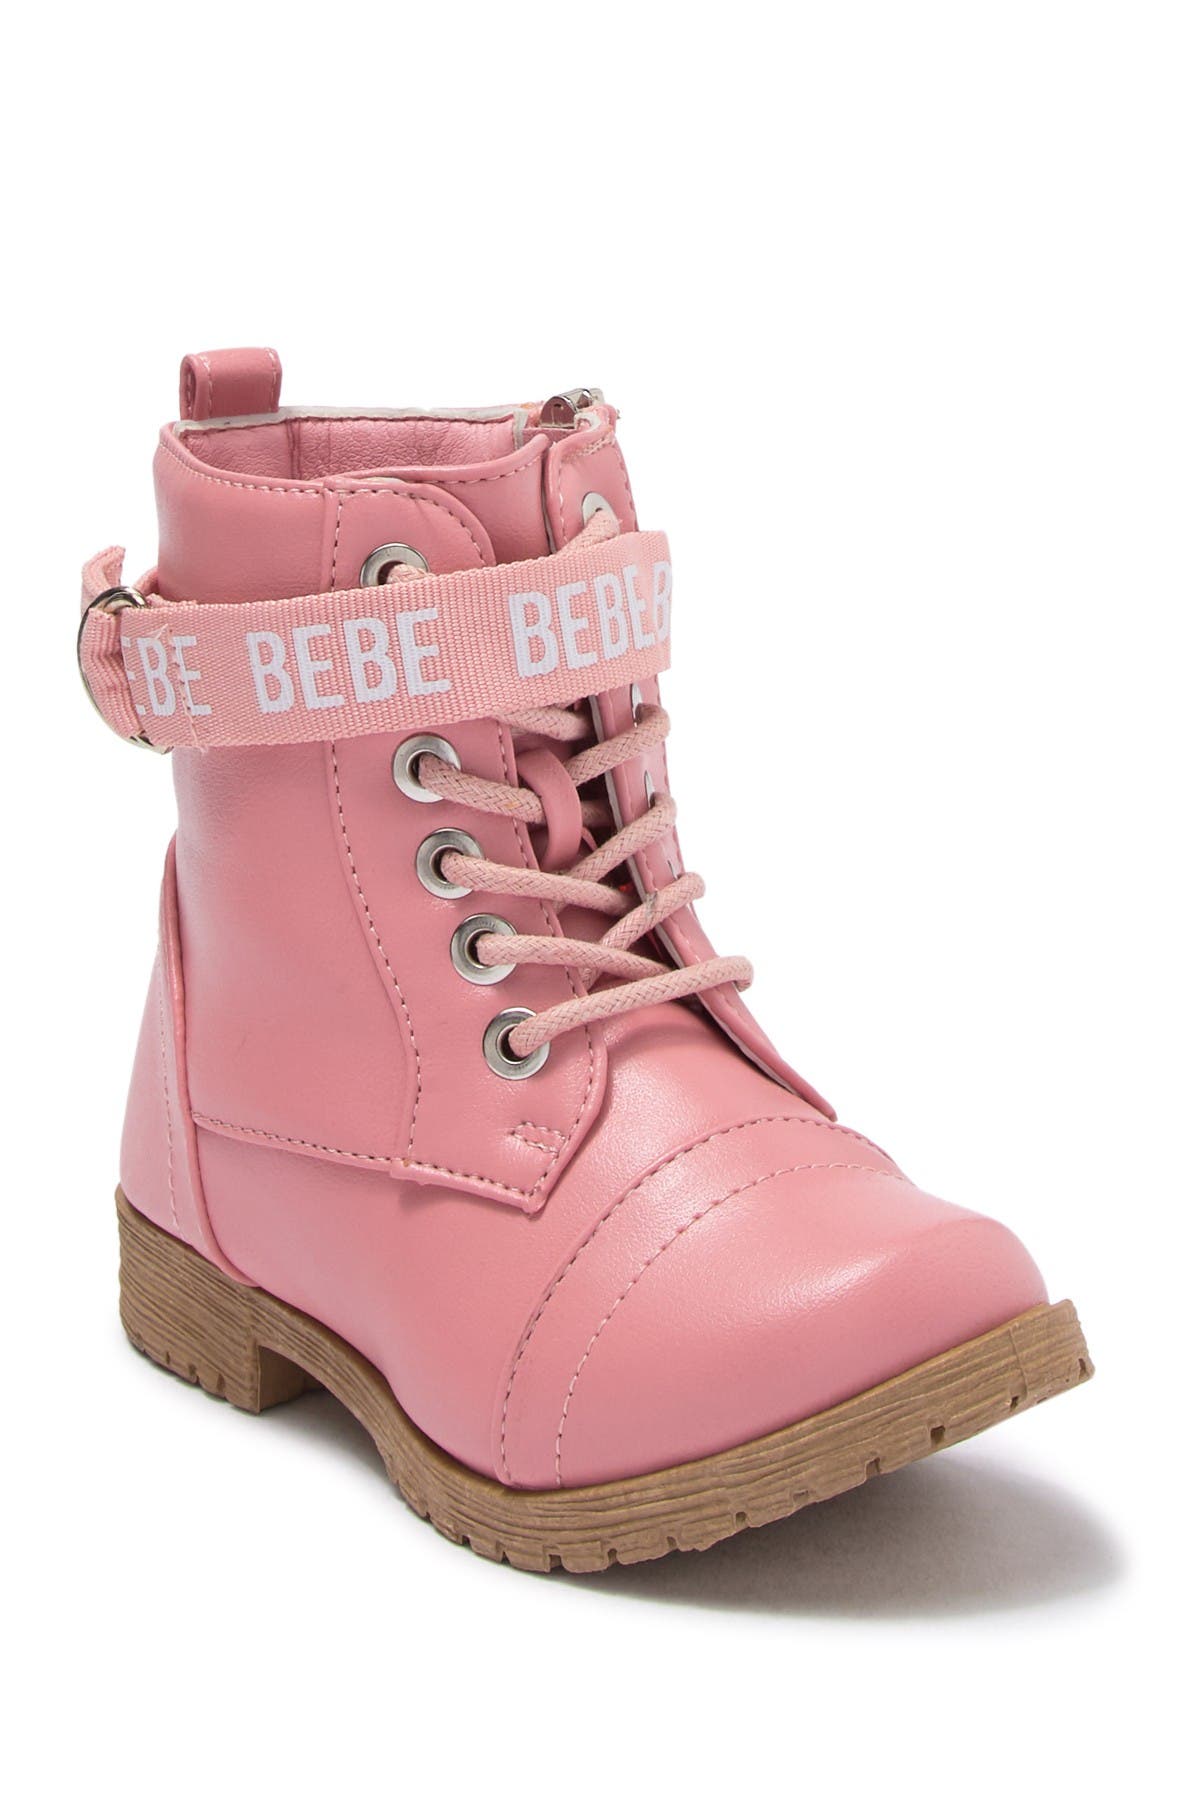 pink bebe boots